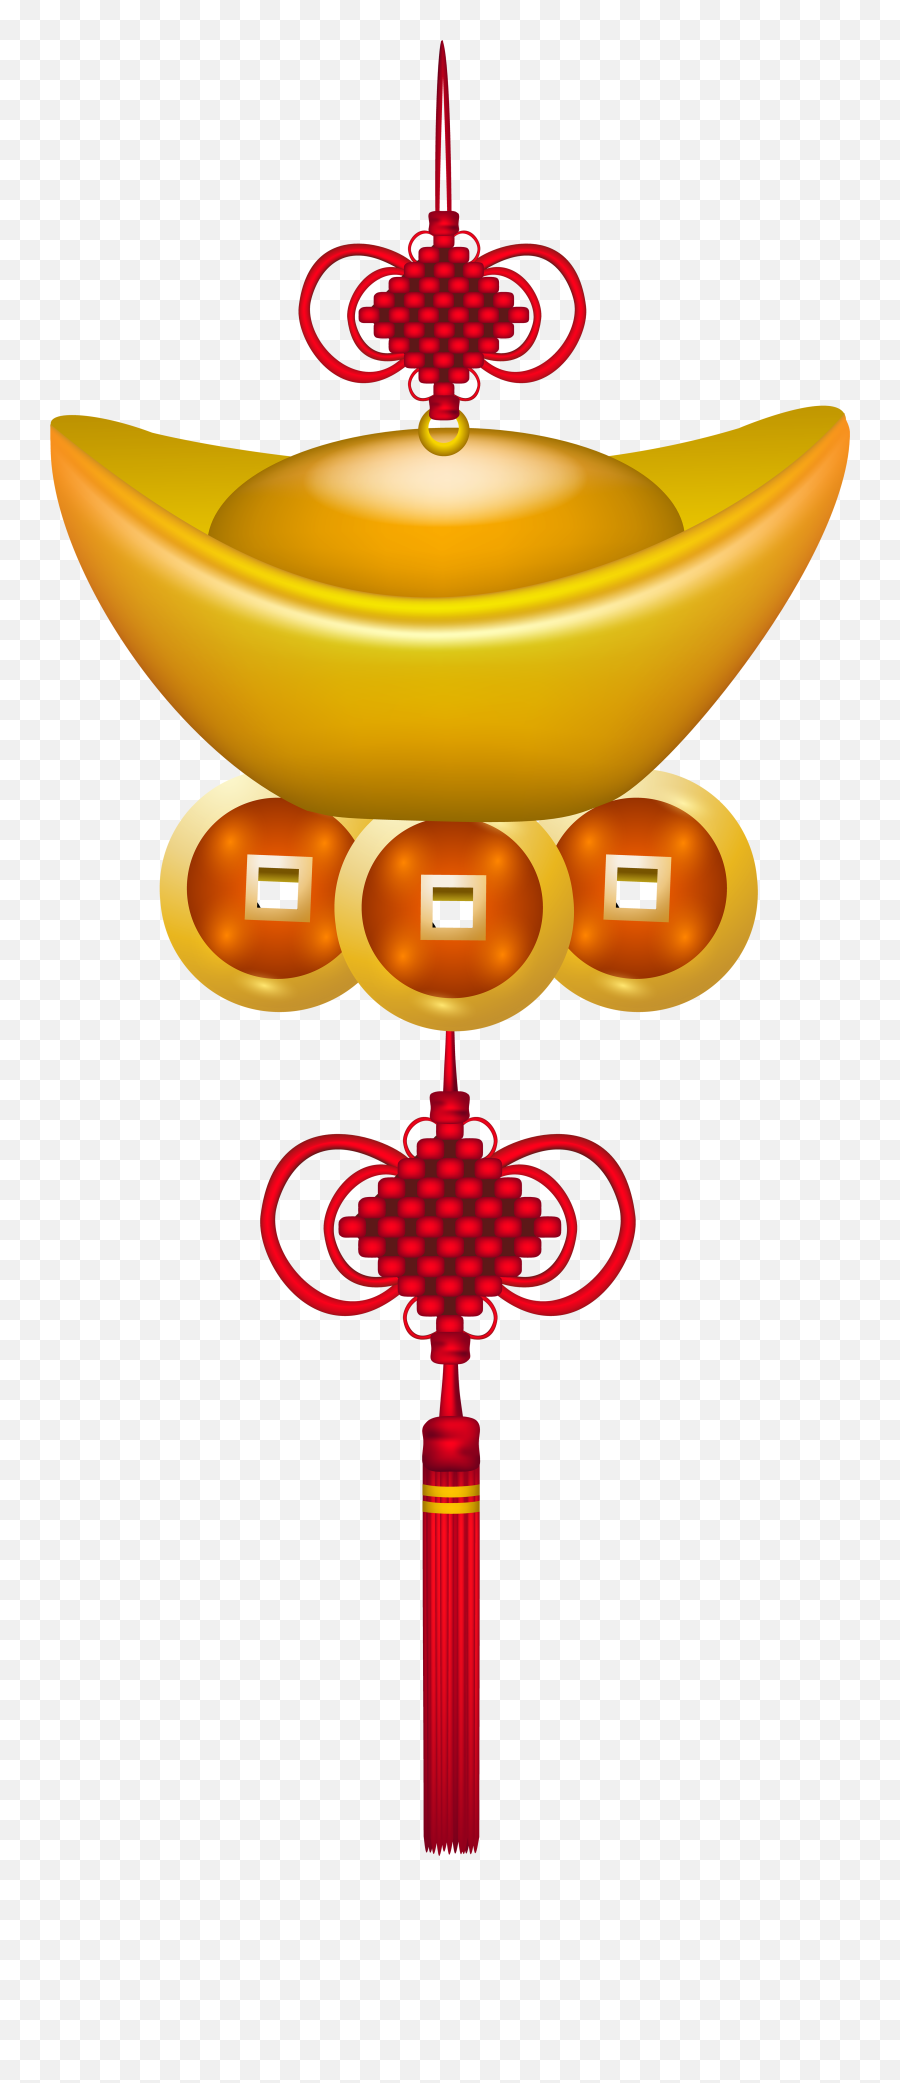 Download Chinese Ornament Png Clip Art - Chinese New Year Ornment Transparent Emoji,Ornament Clipart